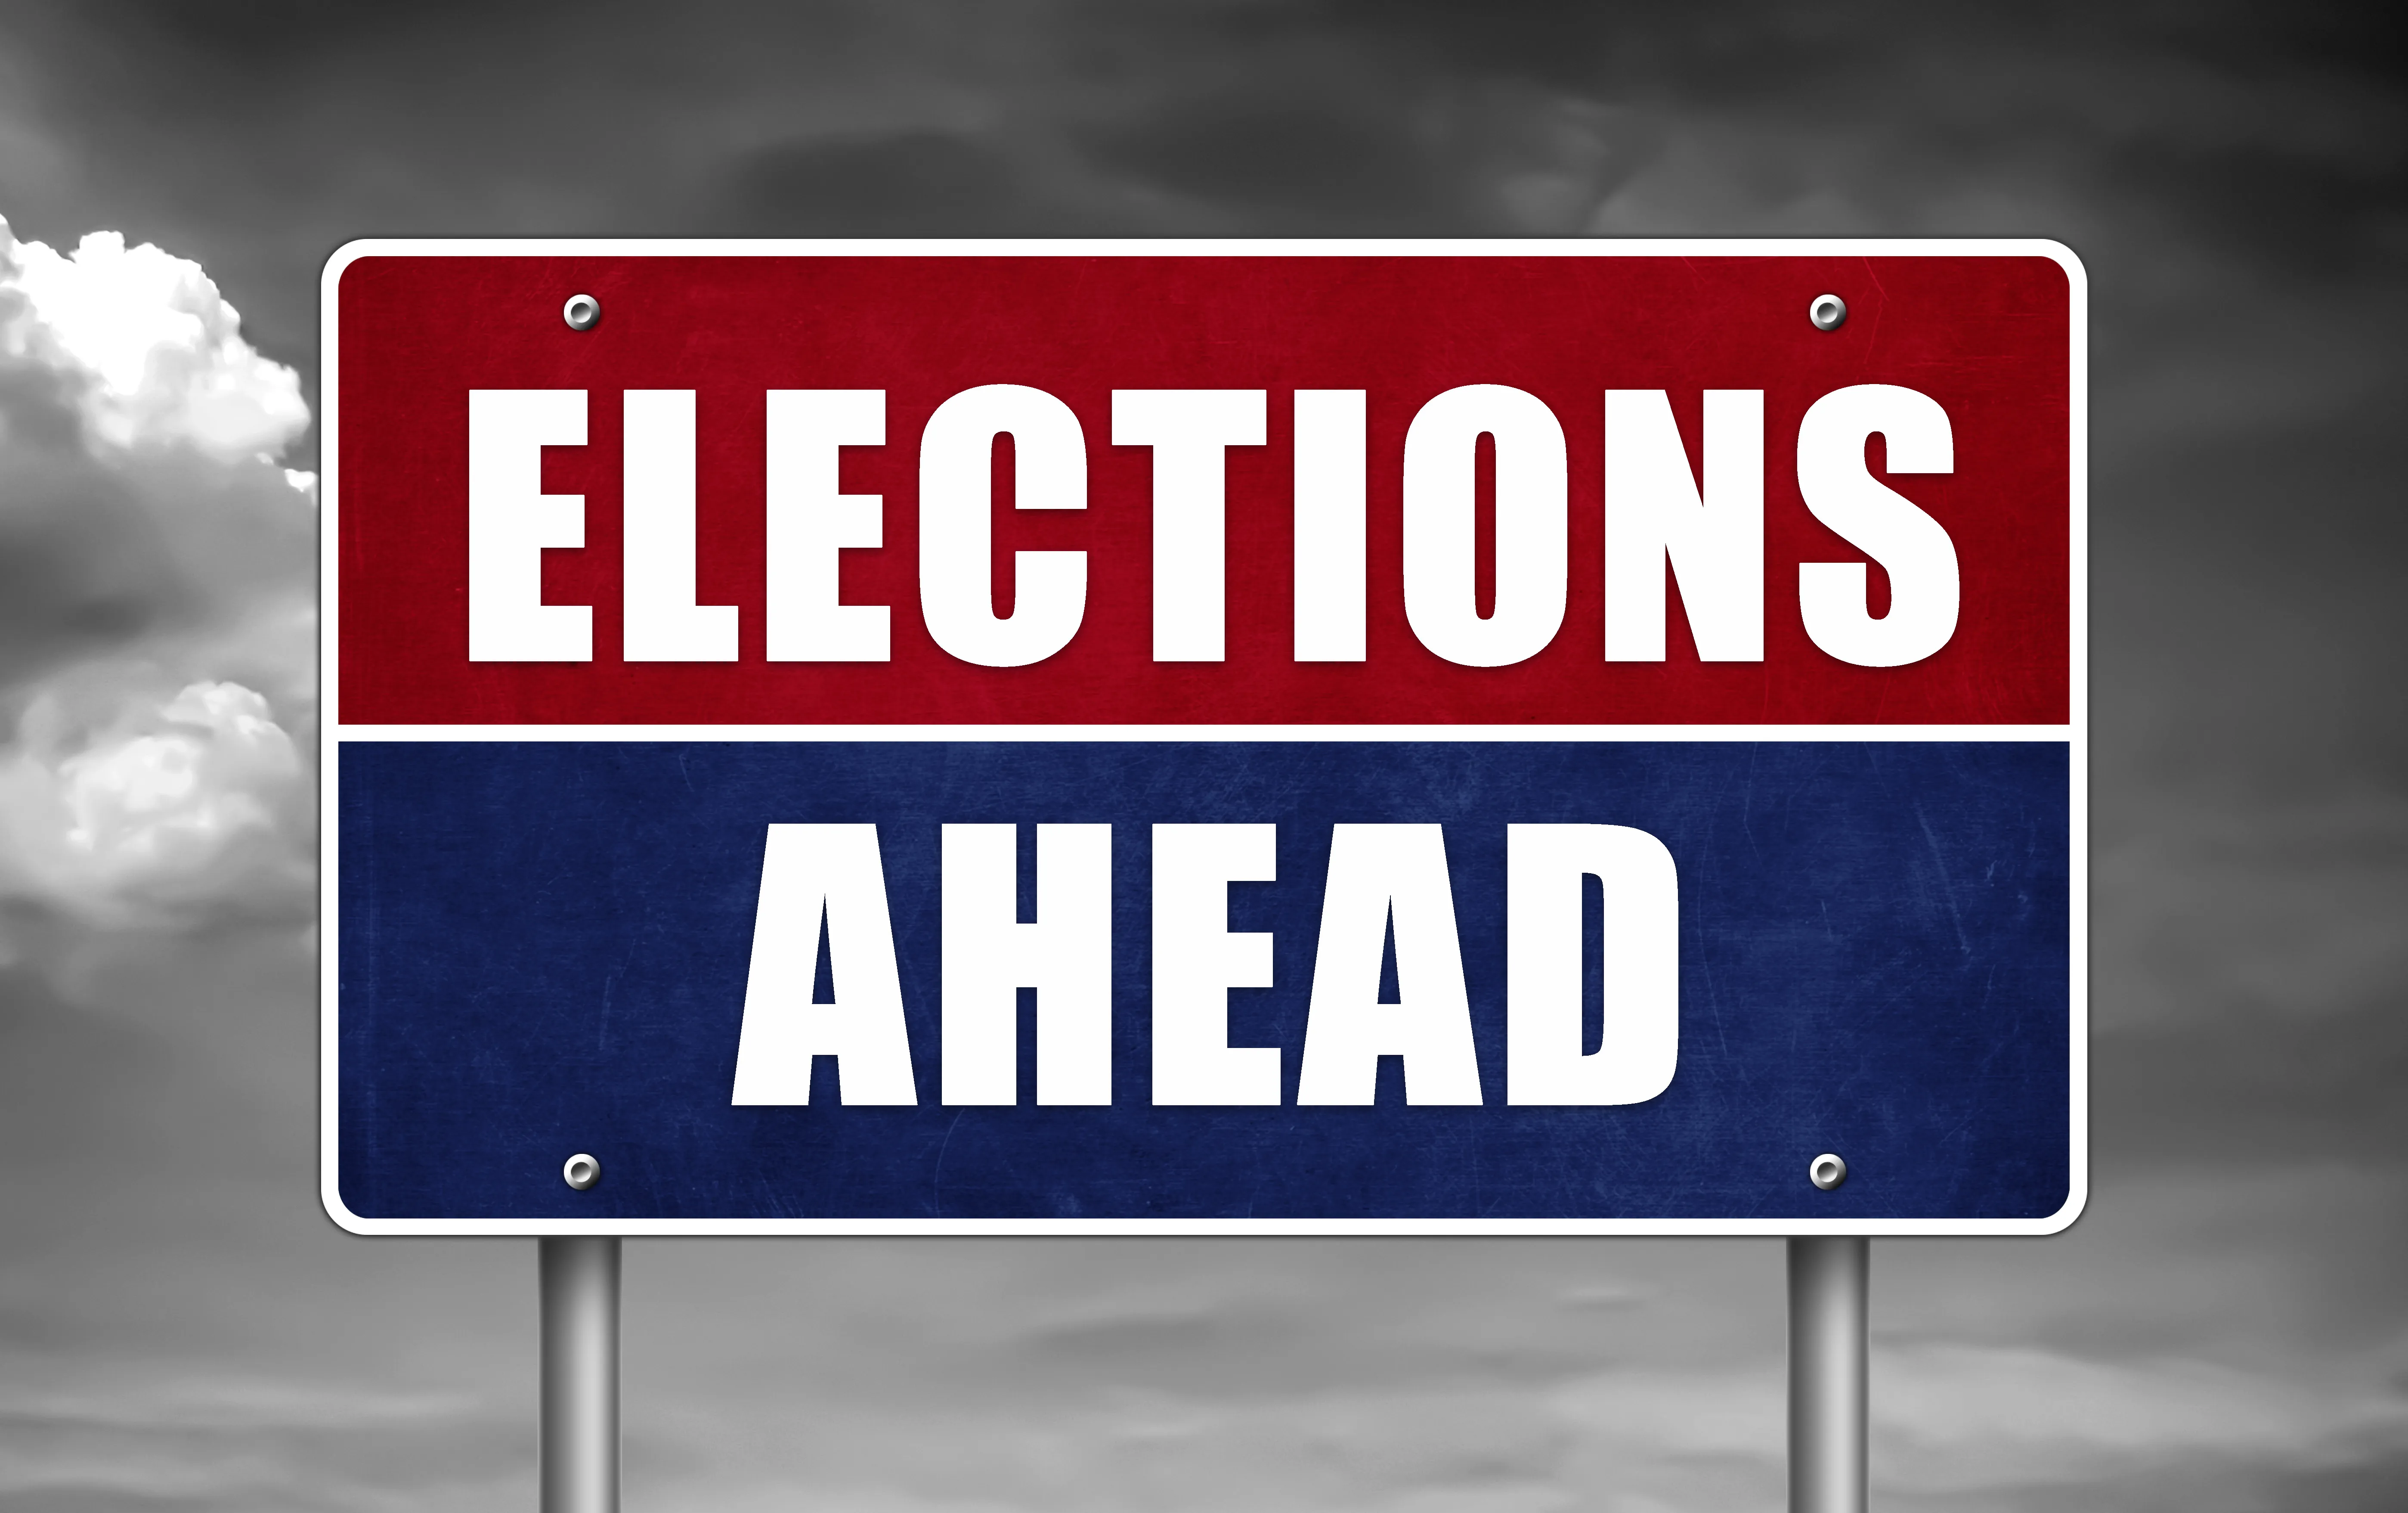 Roadside-style sign with the words "Elections Ahead"